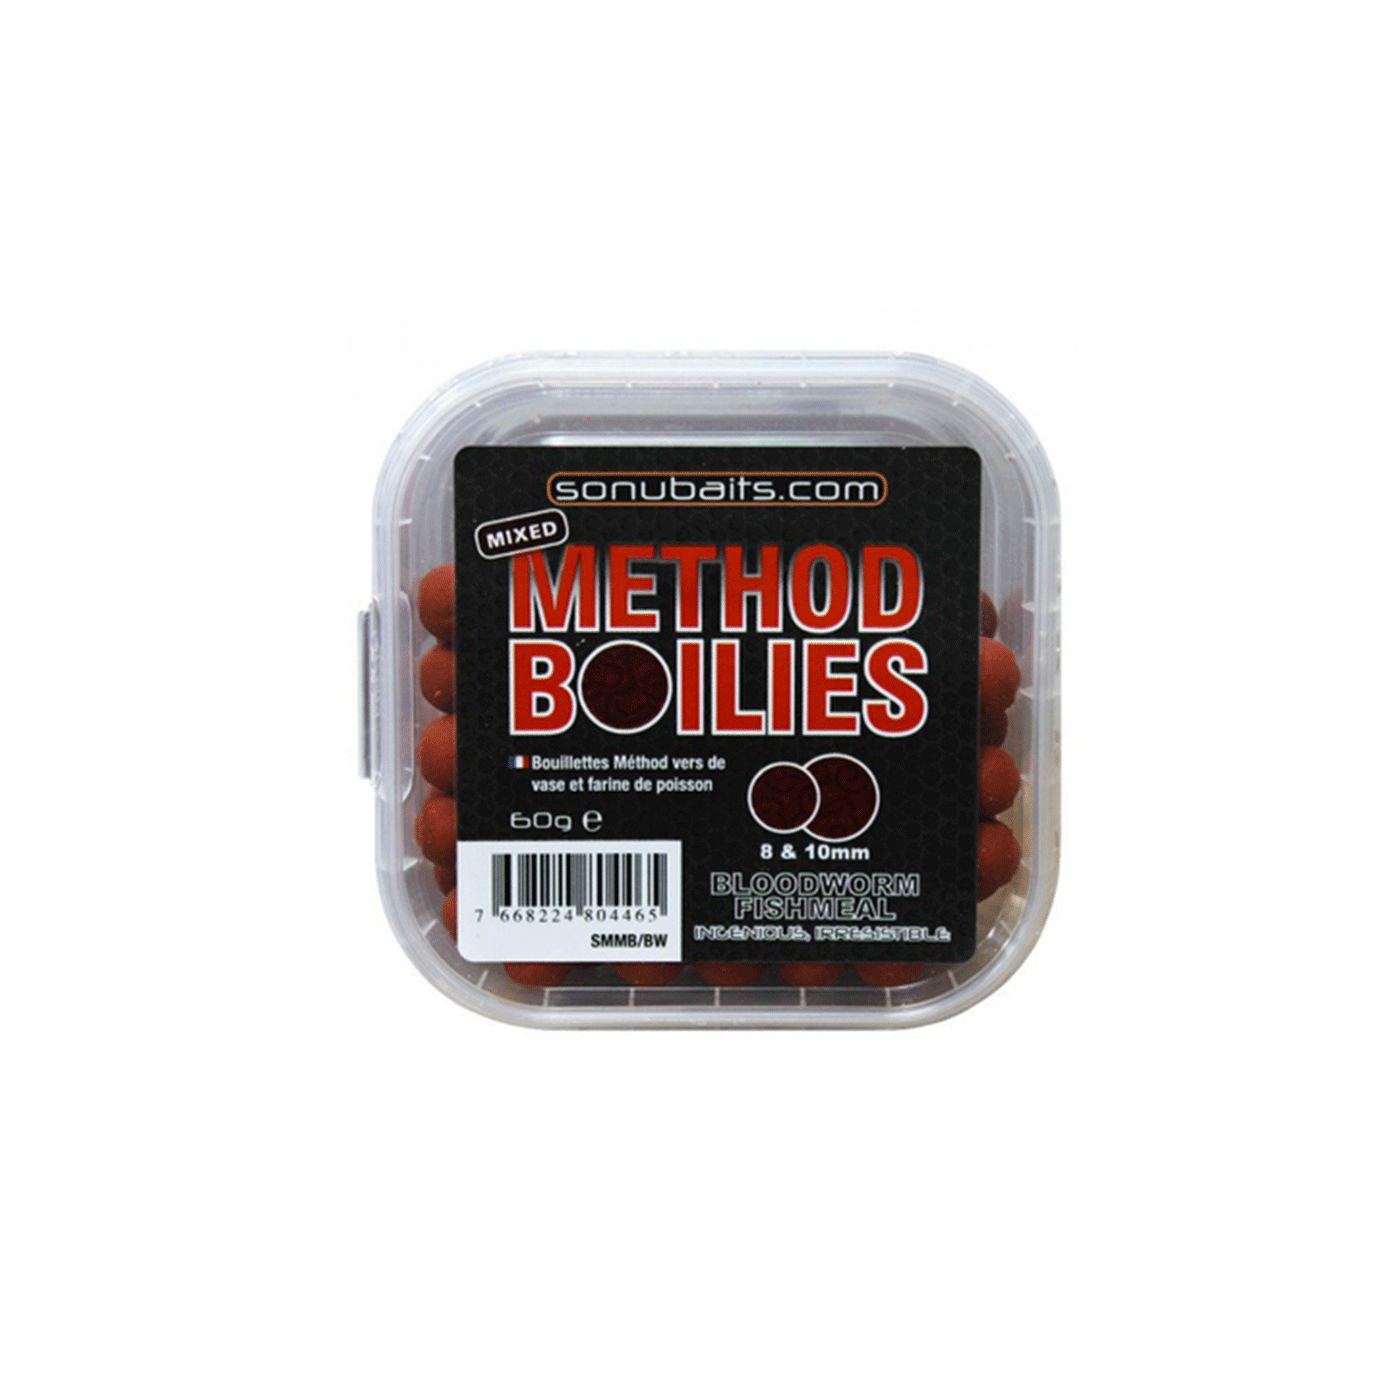 SONUBAITS - MIXED METHOD BOILIES 8 &amp; 10mm BLOODWORM FISHMEAL 60g